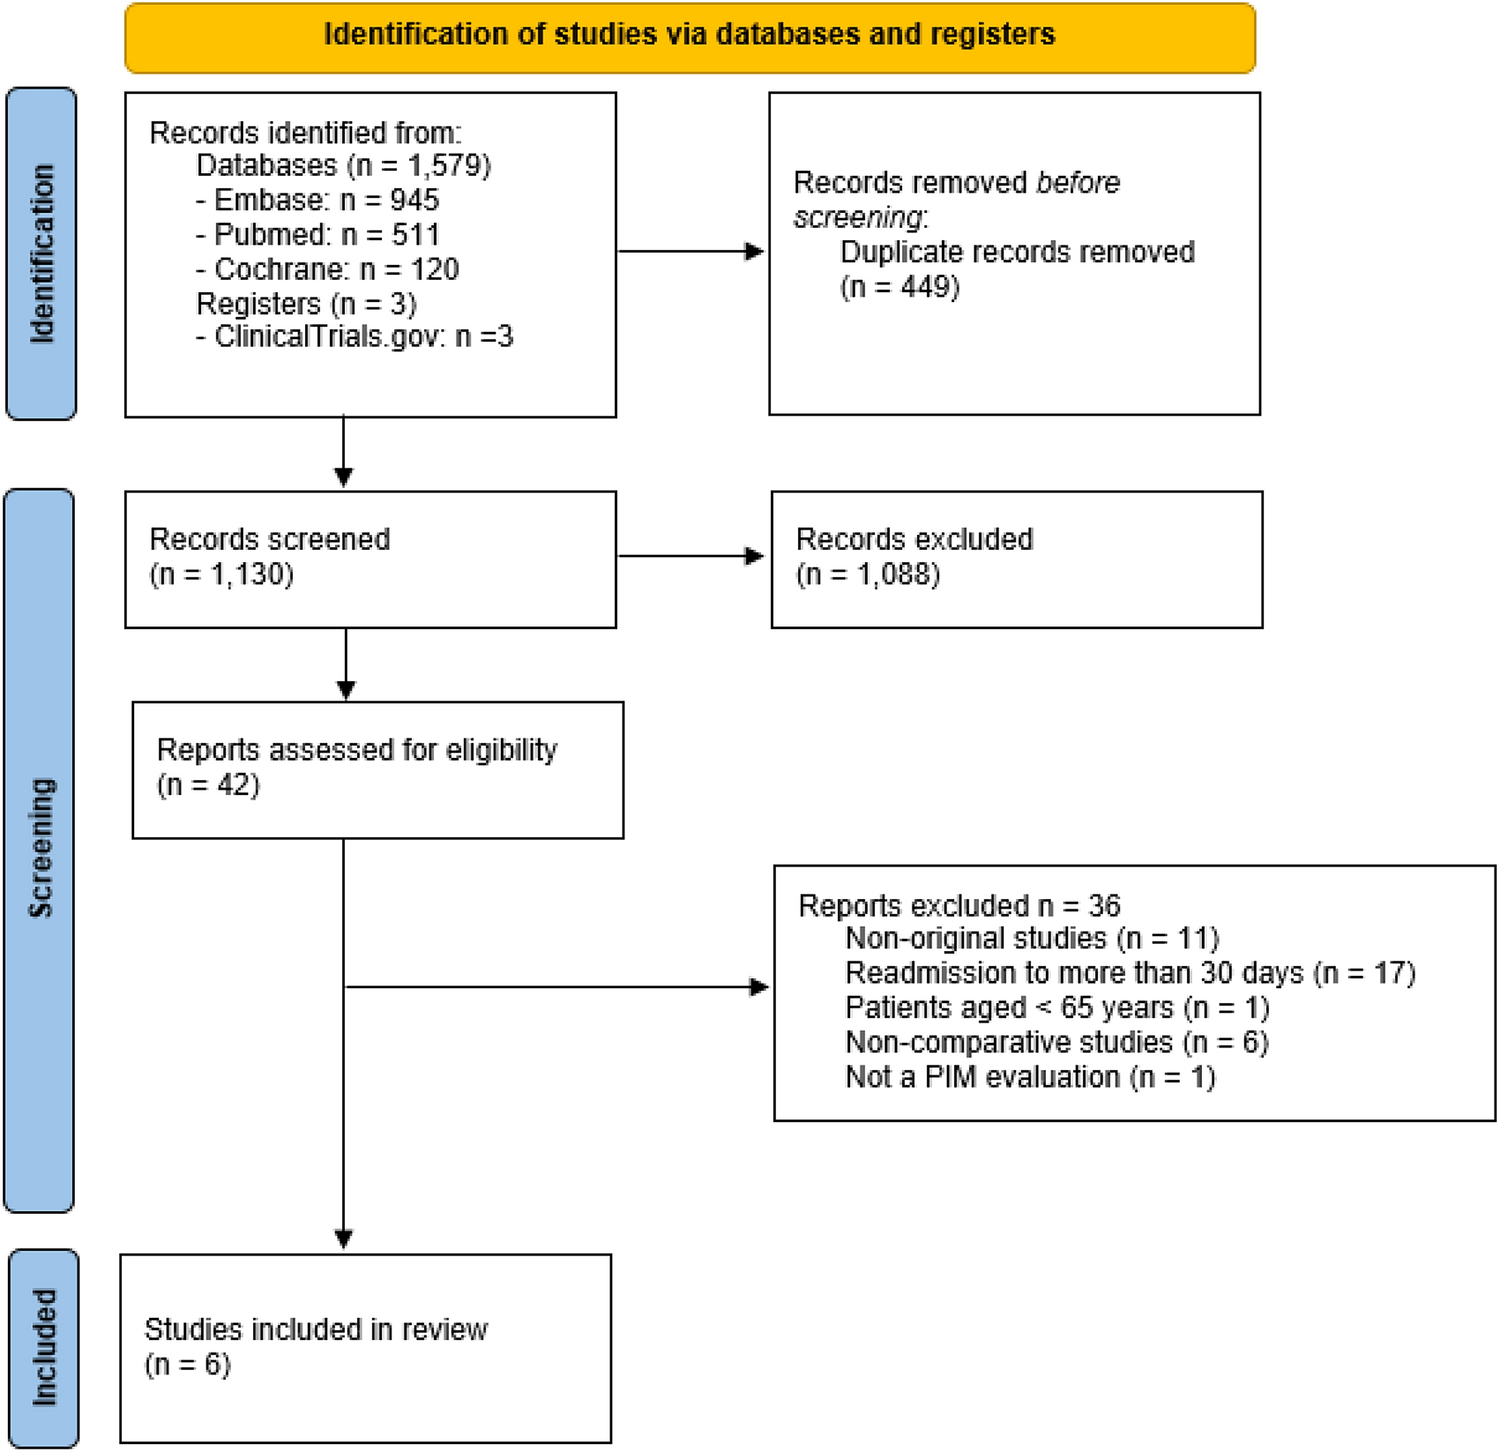 Are Lists of Potentially Inappropriate Medications Associated with Hospital Readmissions? A Systematic Review